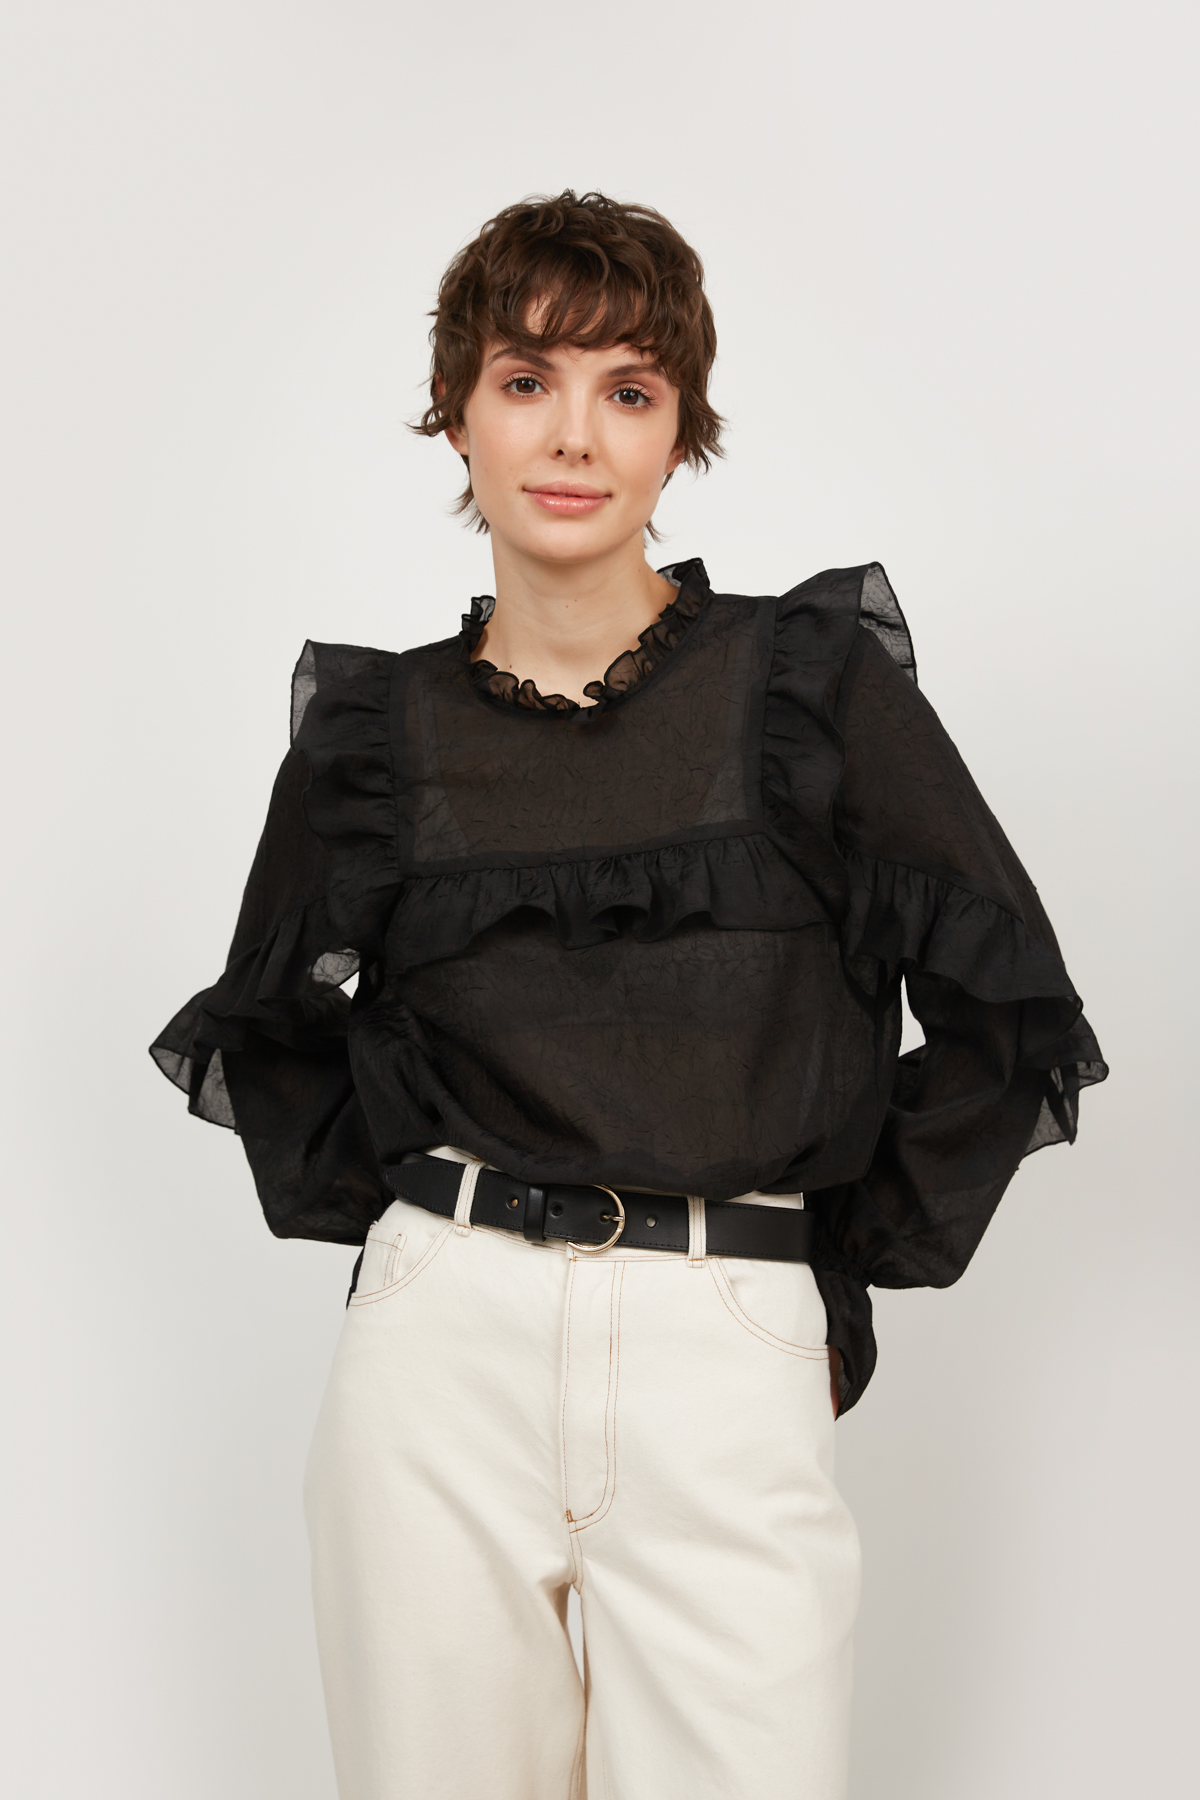 Blouse with ruffles in wrinkled chiffon in black, photo 3